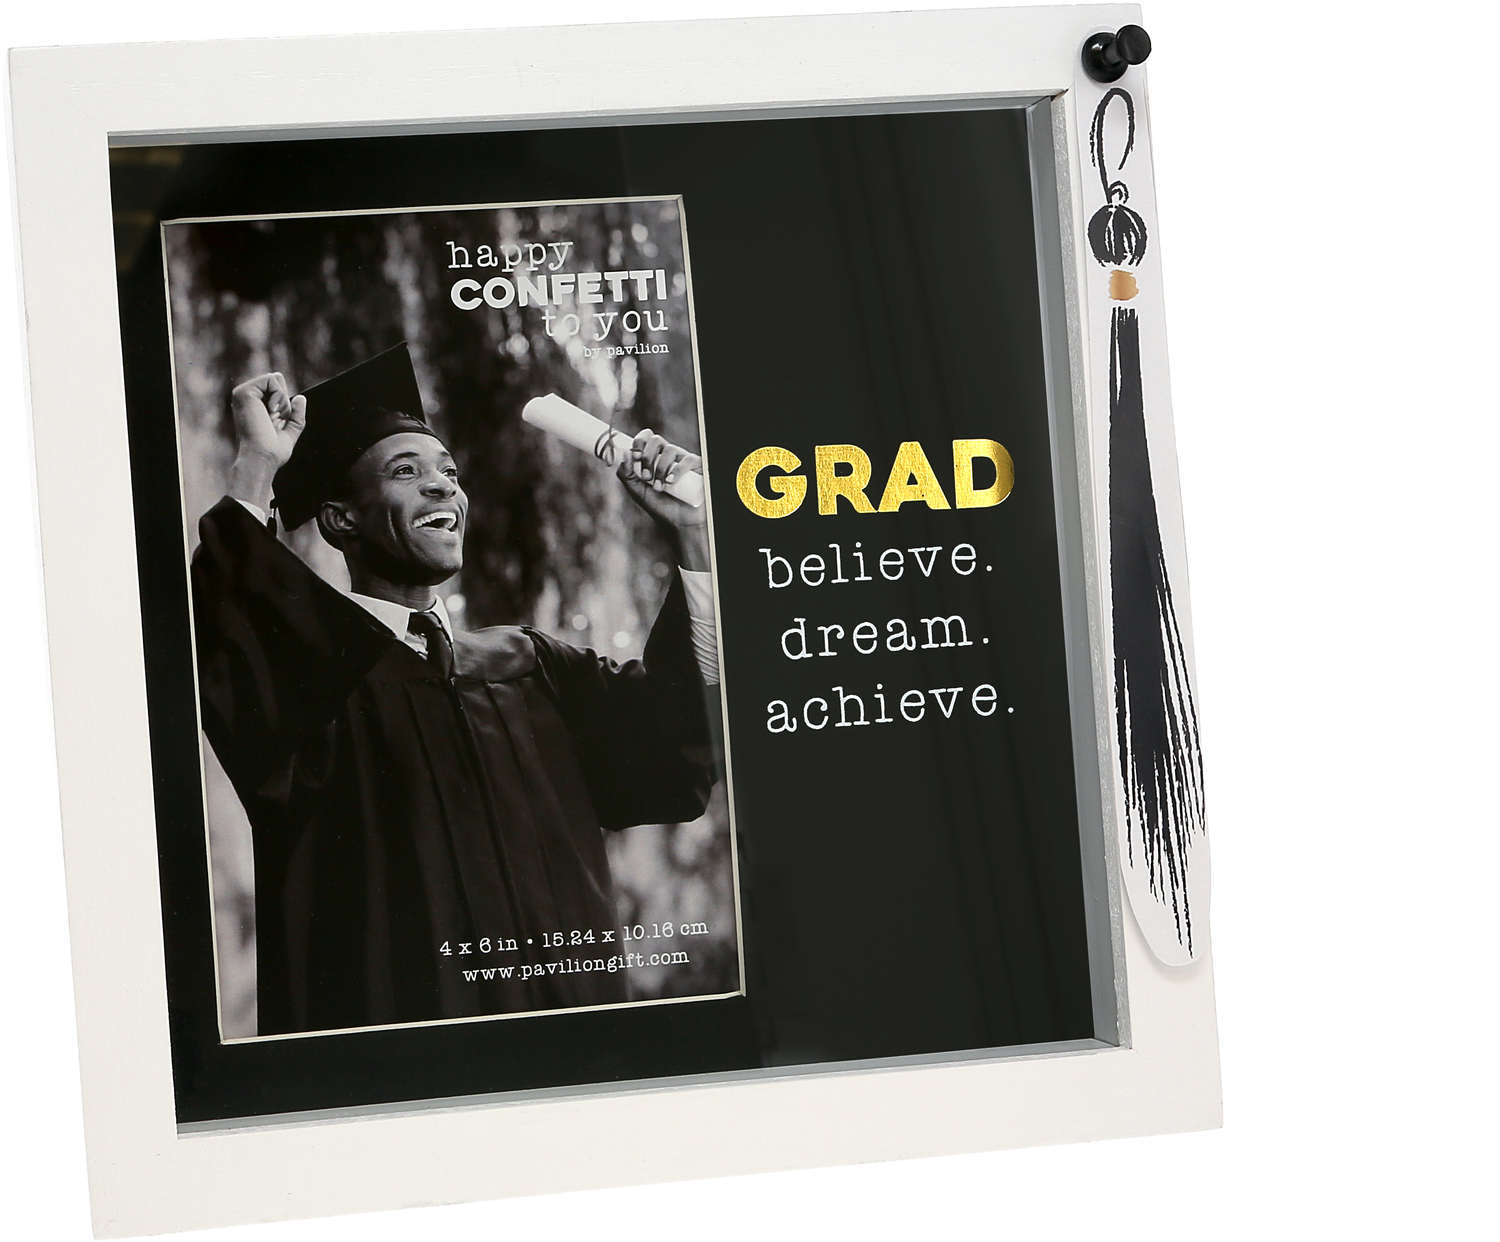 Grad by Happy Confetti to You - Grad - 7.5" Shadow Box Frame
(Holds 4" x 6" Photo)